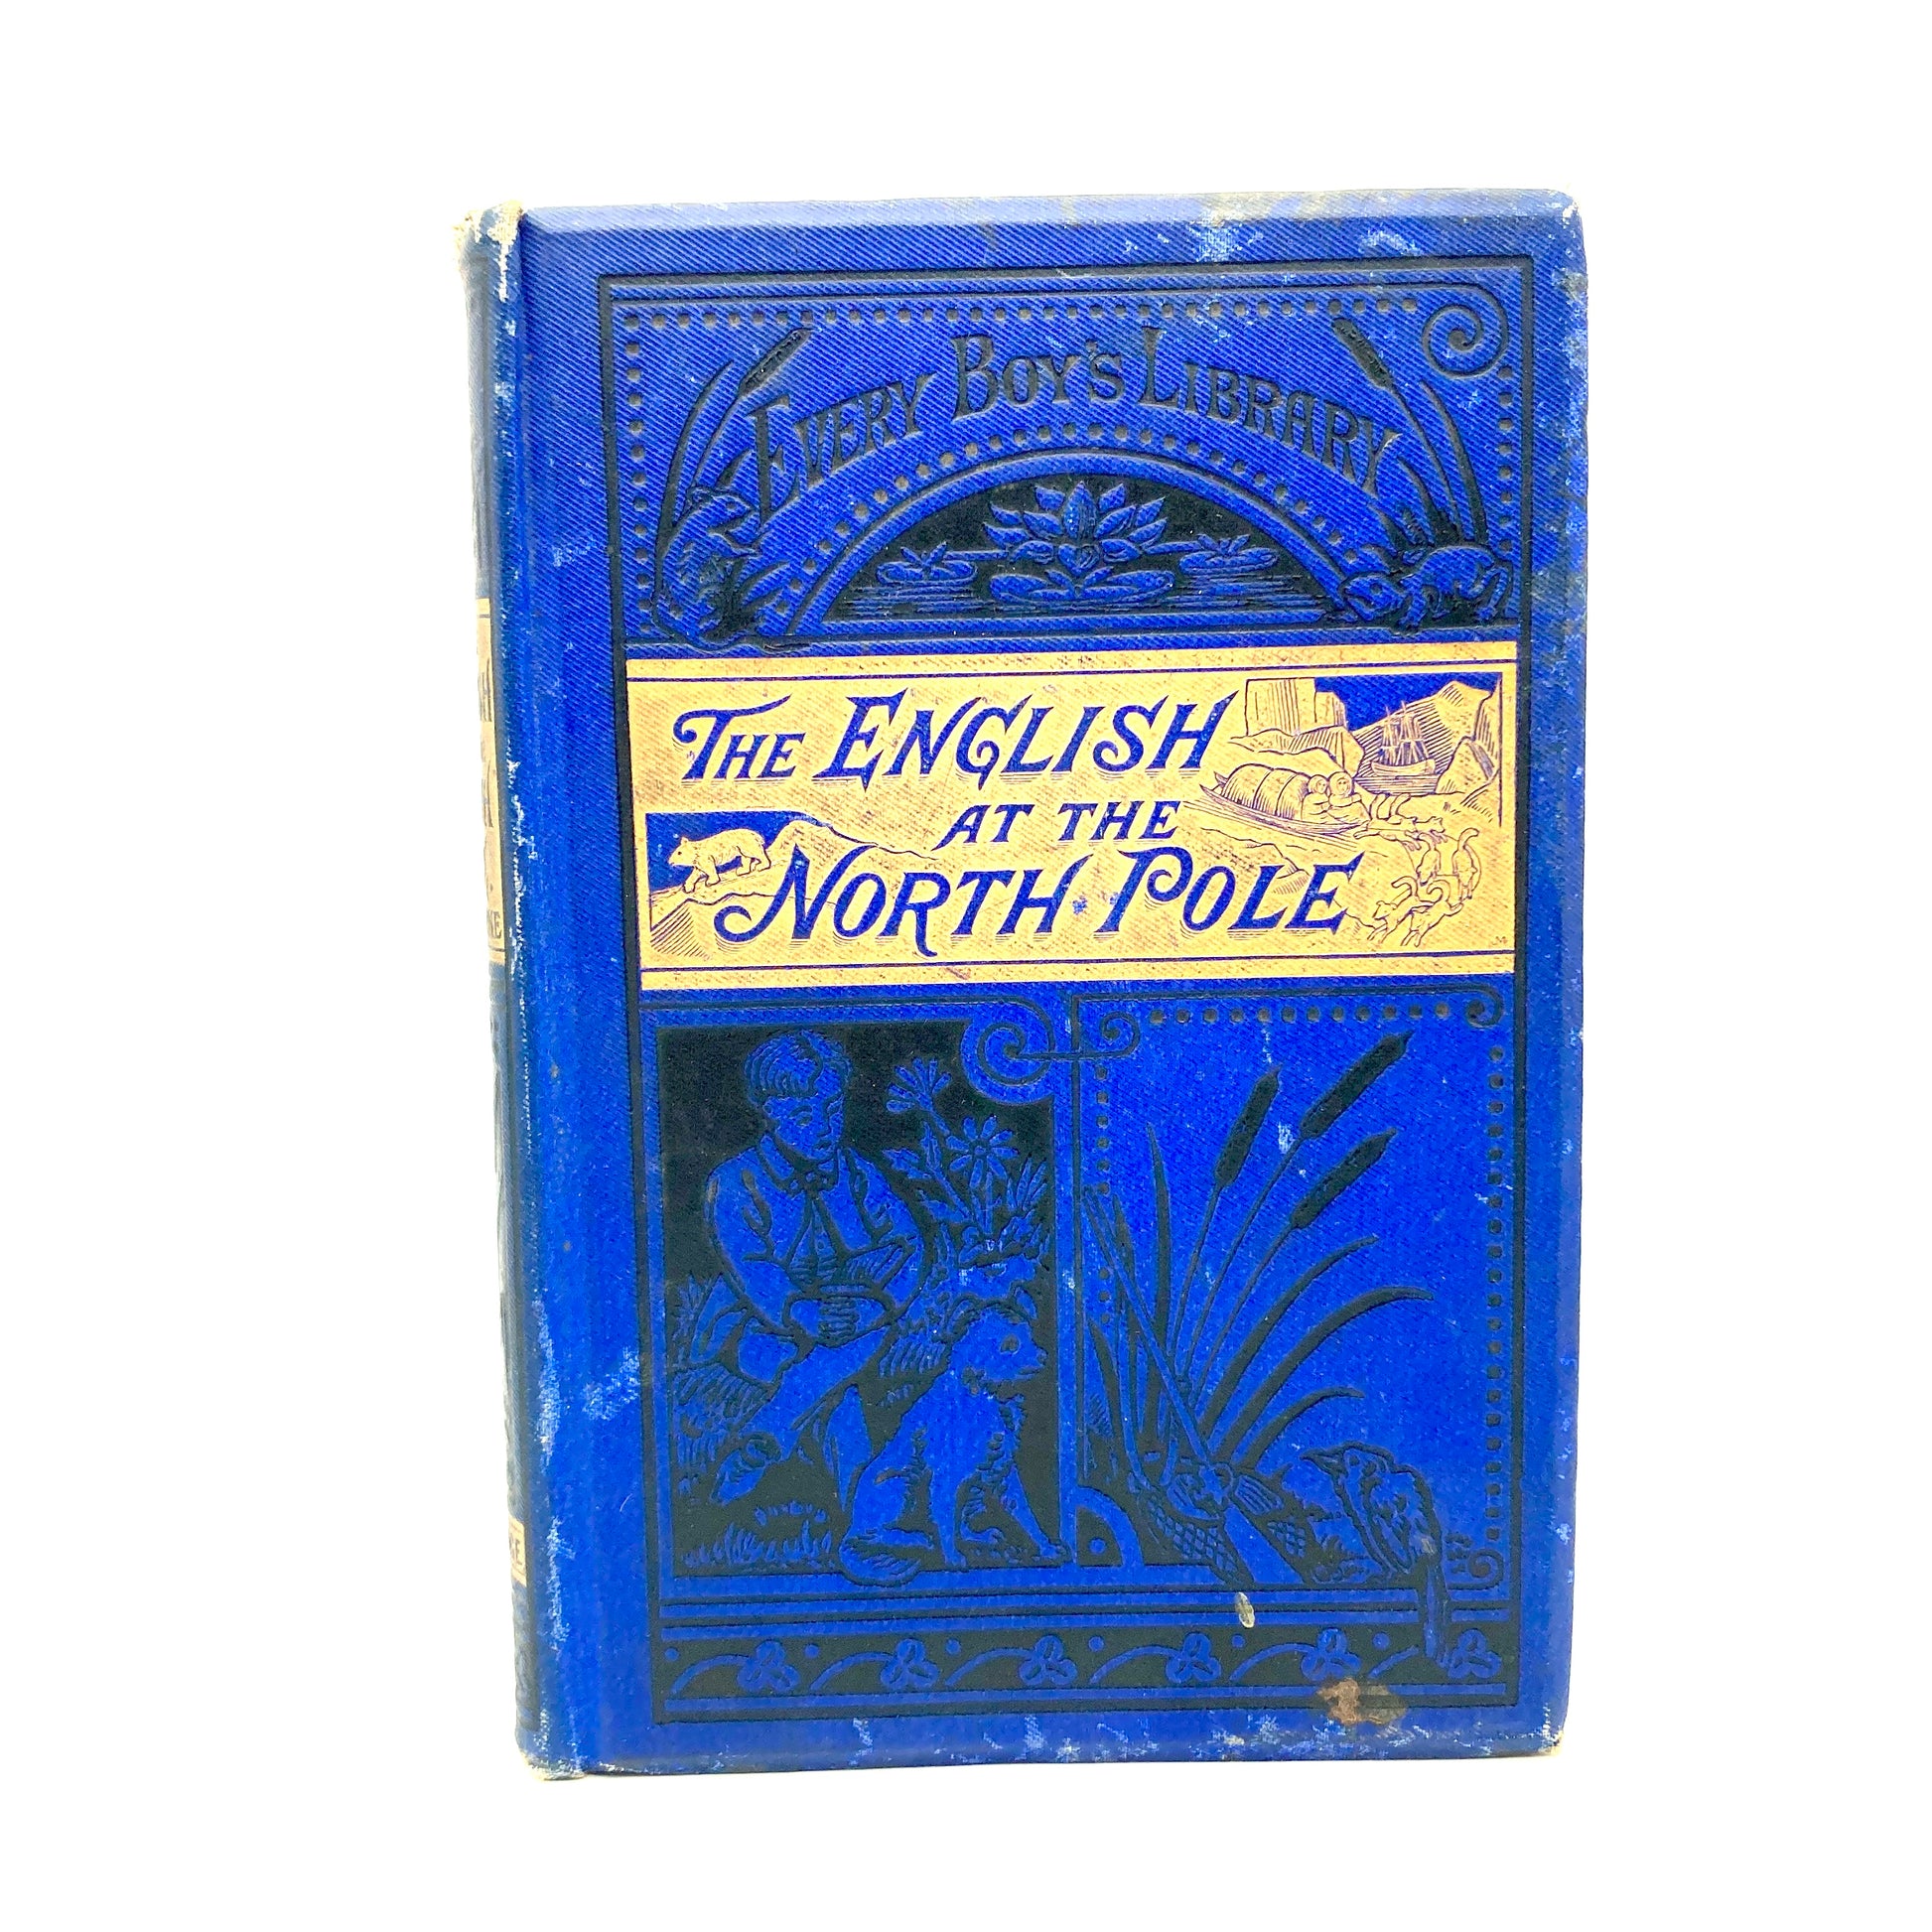 VERNE, Jules "The English at the North Pole" [George Routledge, 1876] 2nd Edition - Buzz Bookstore